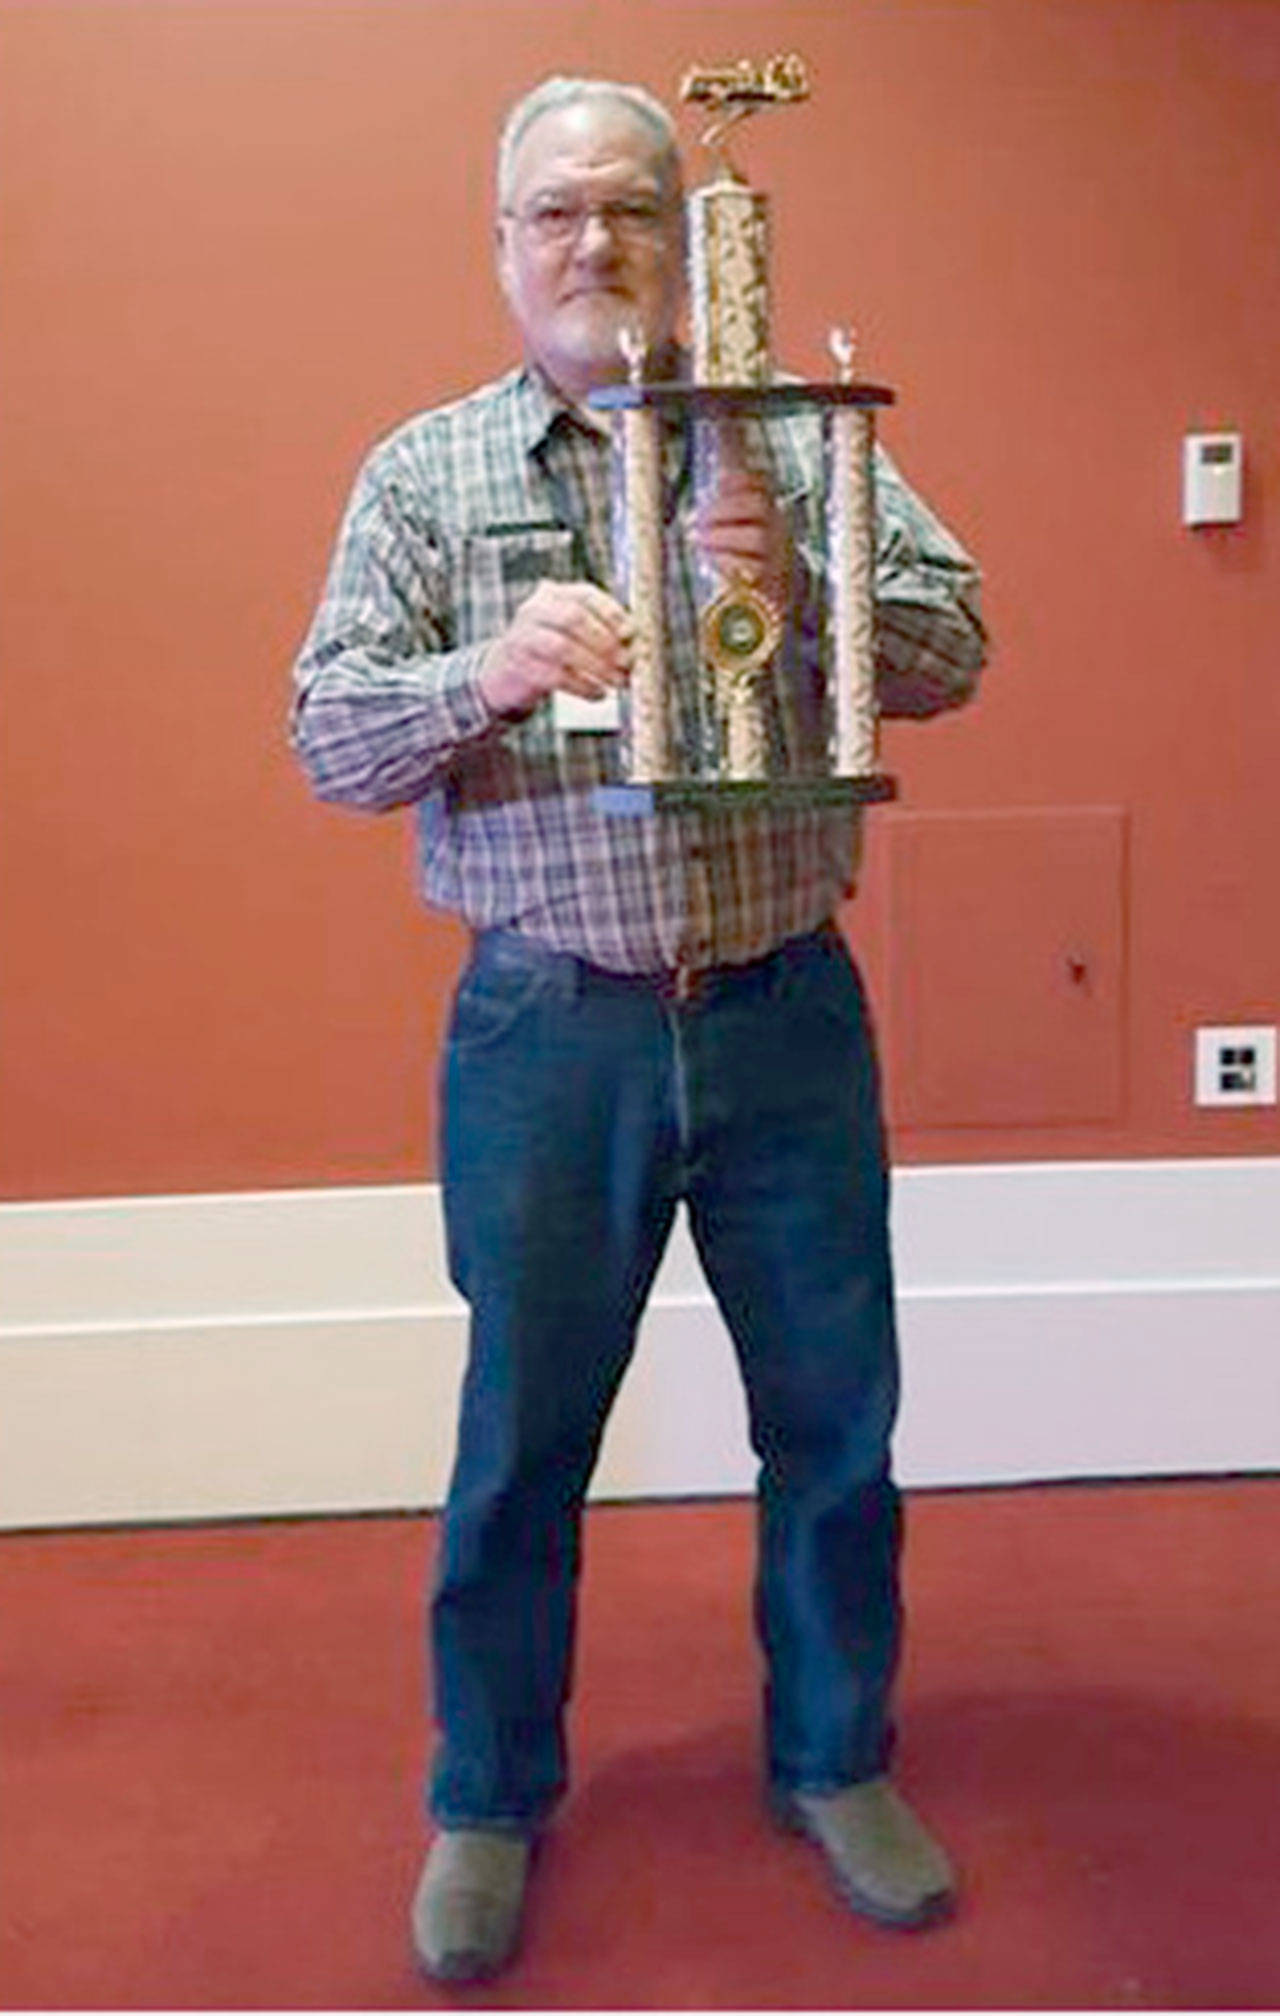 Commissioner Terry Barnett holds the first-place trophy Clallam County Fire District No. 4 received from the state Fire Commissioner’s Association. (Clallam County Fire District No. 4)